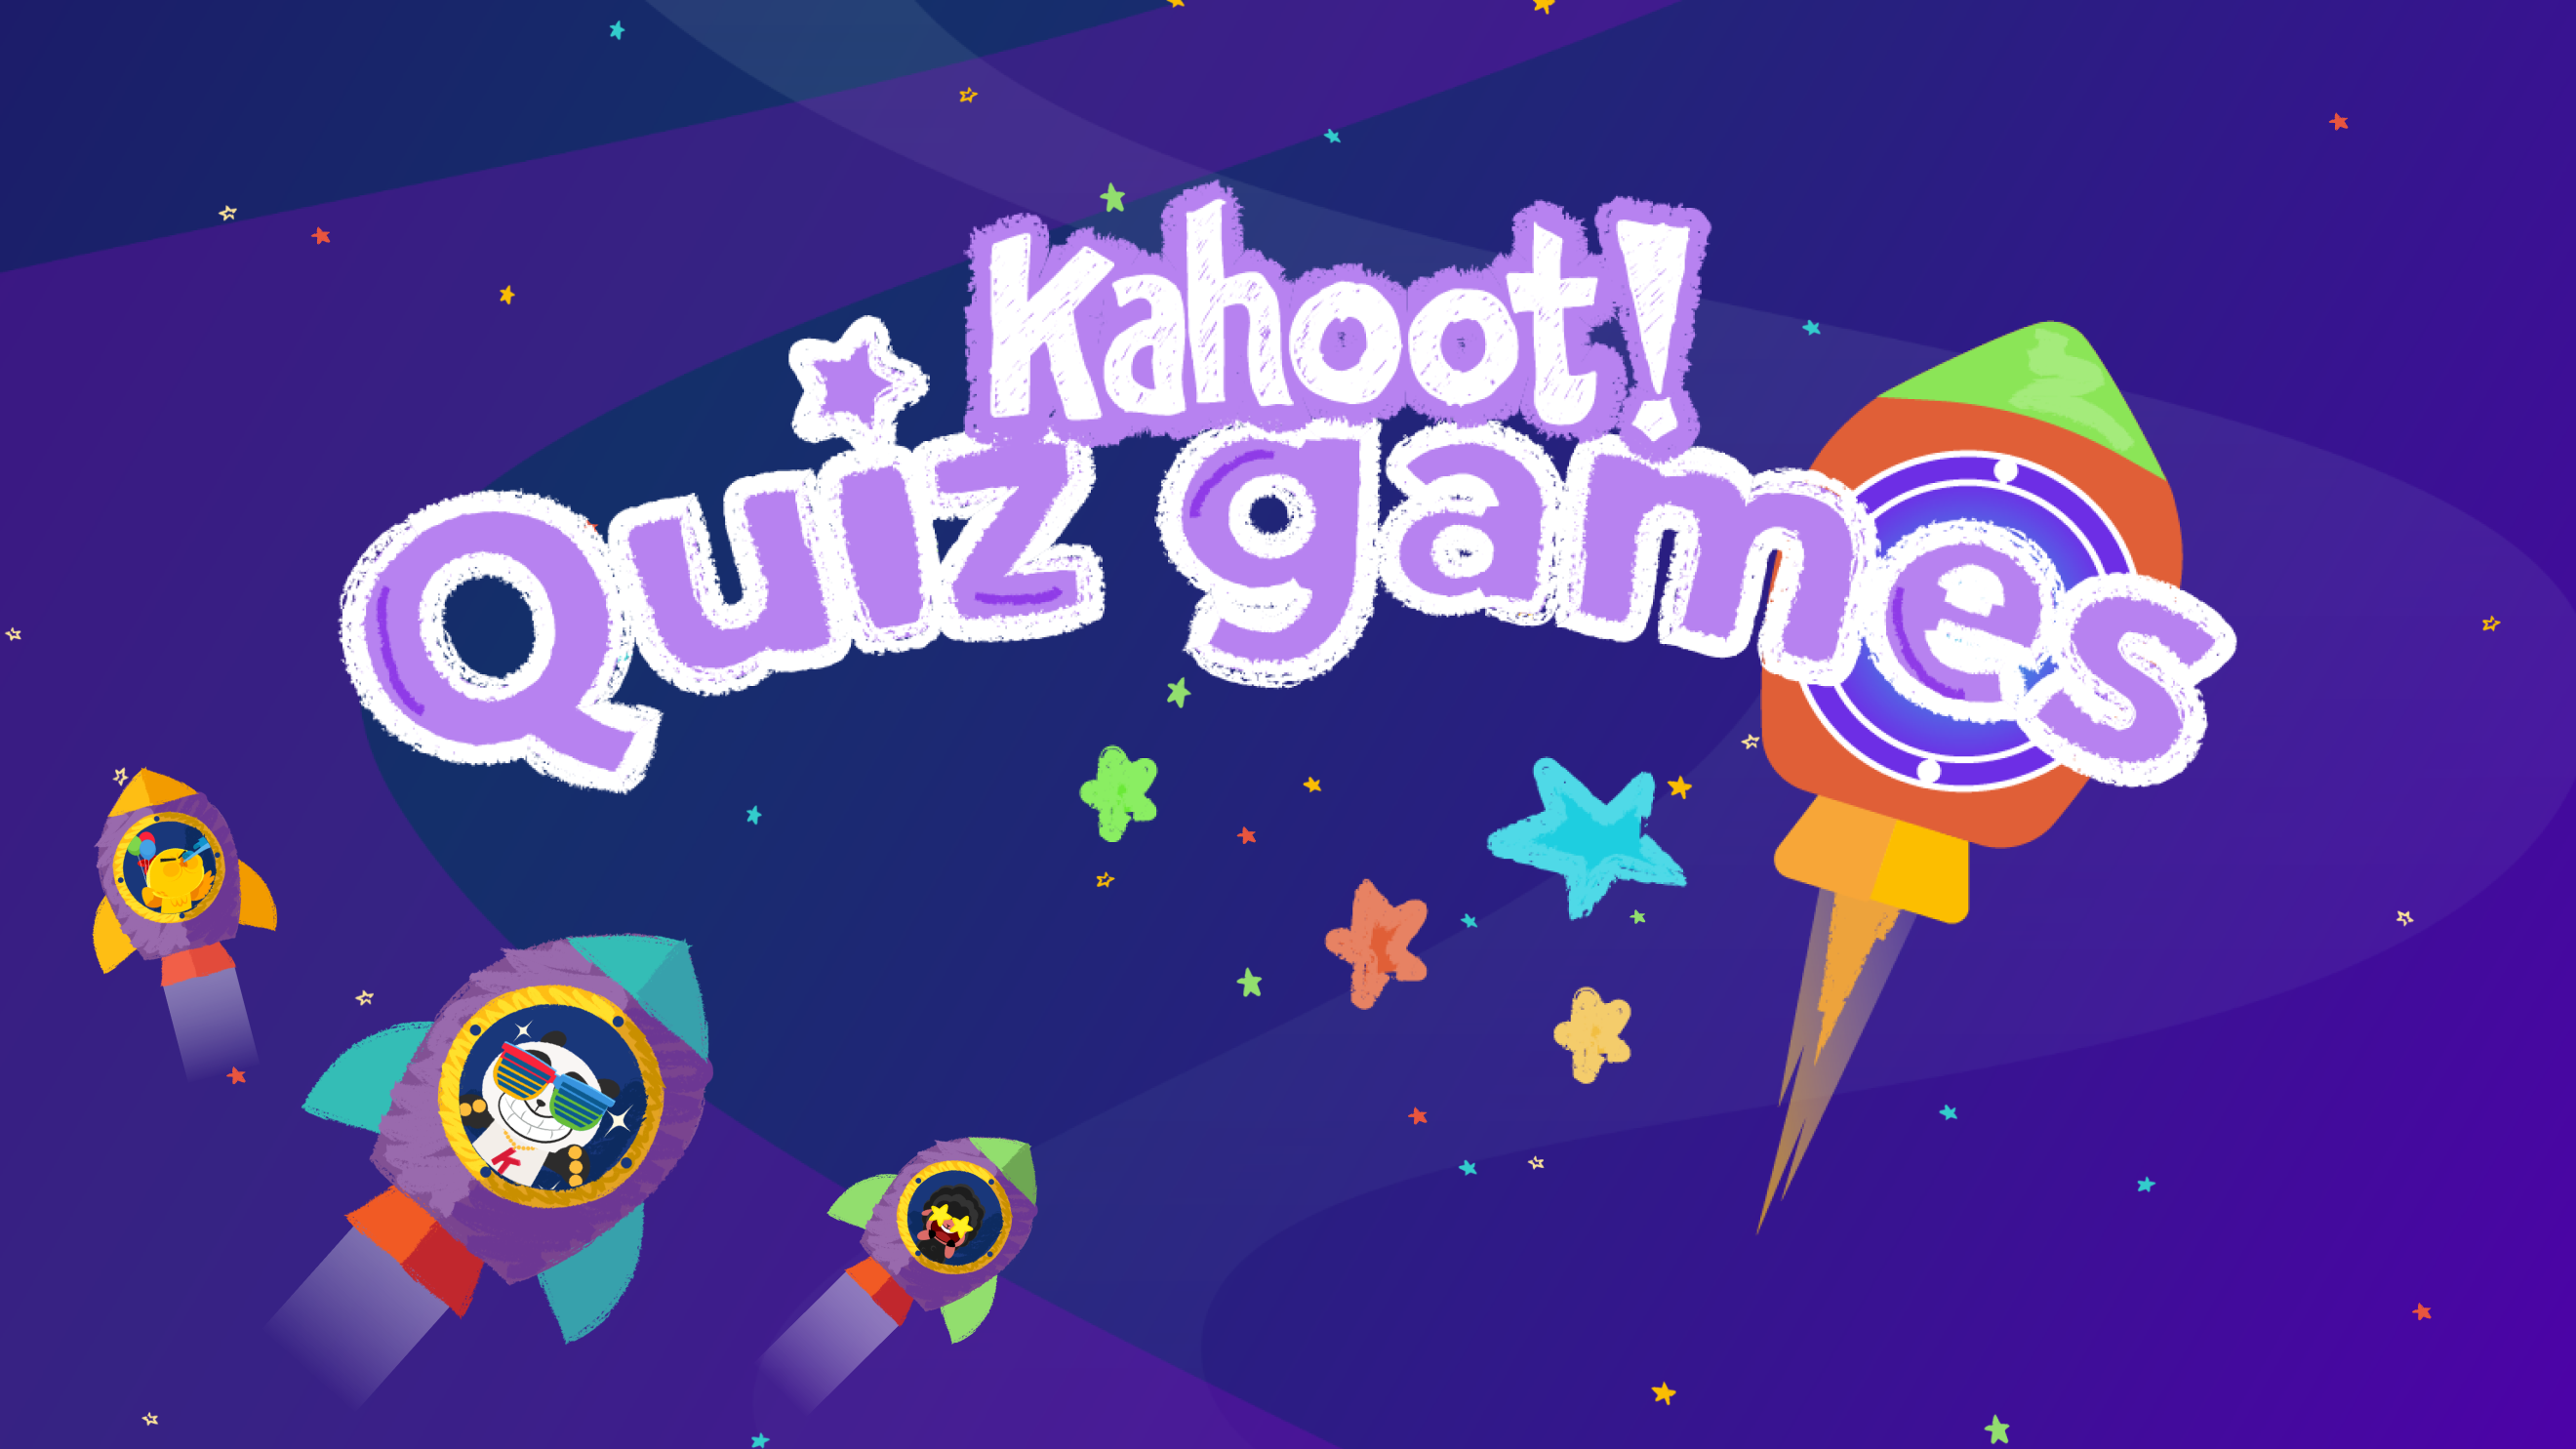 Kahoot! live game: see questions on player's screen – Help and